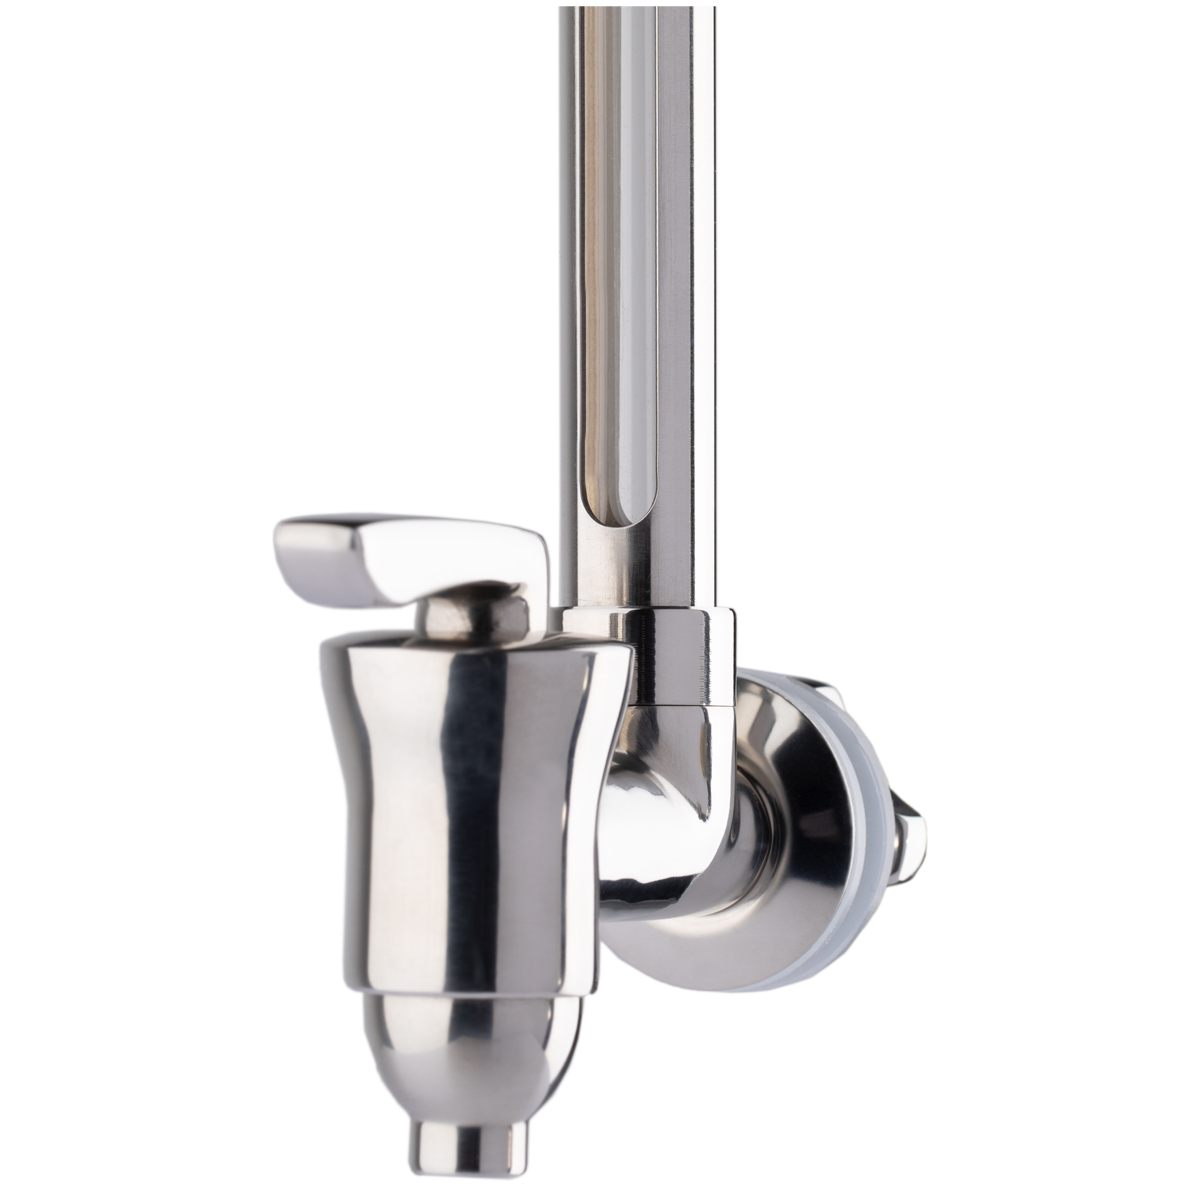 Close-up of Stainless Steel Water View Spigot